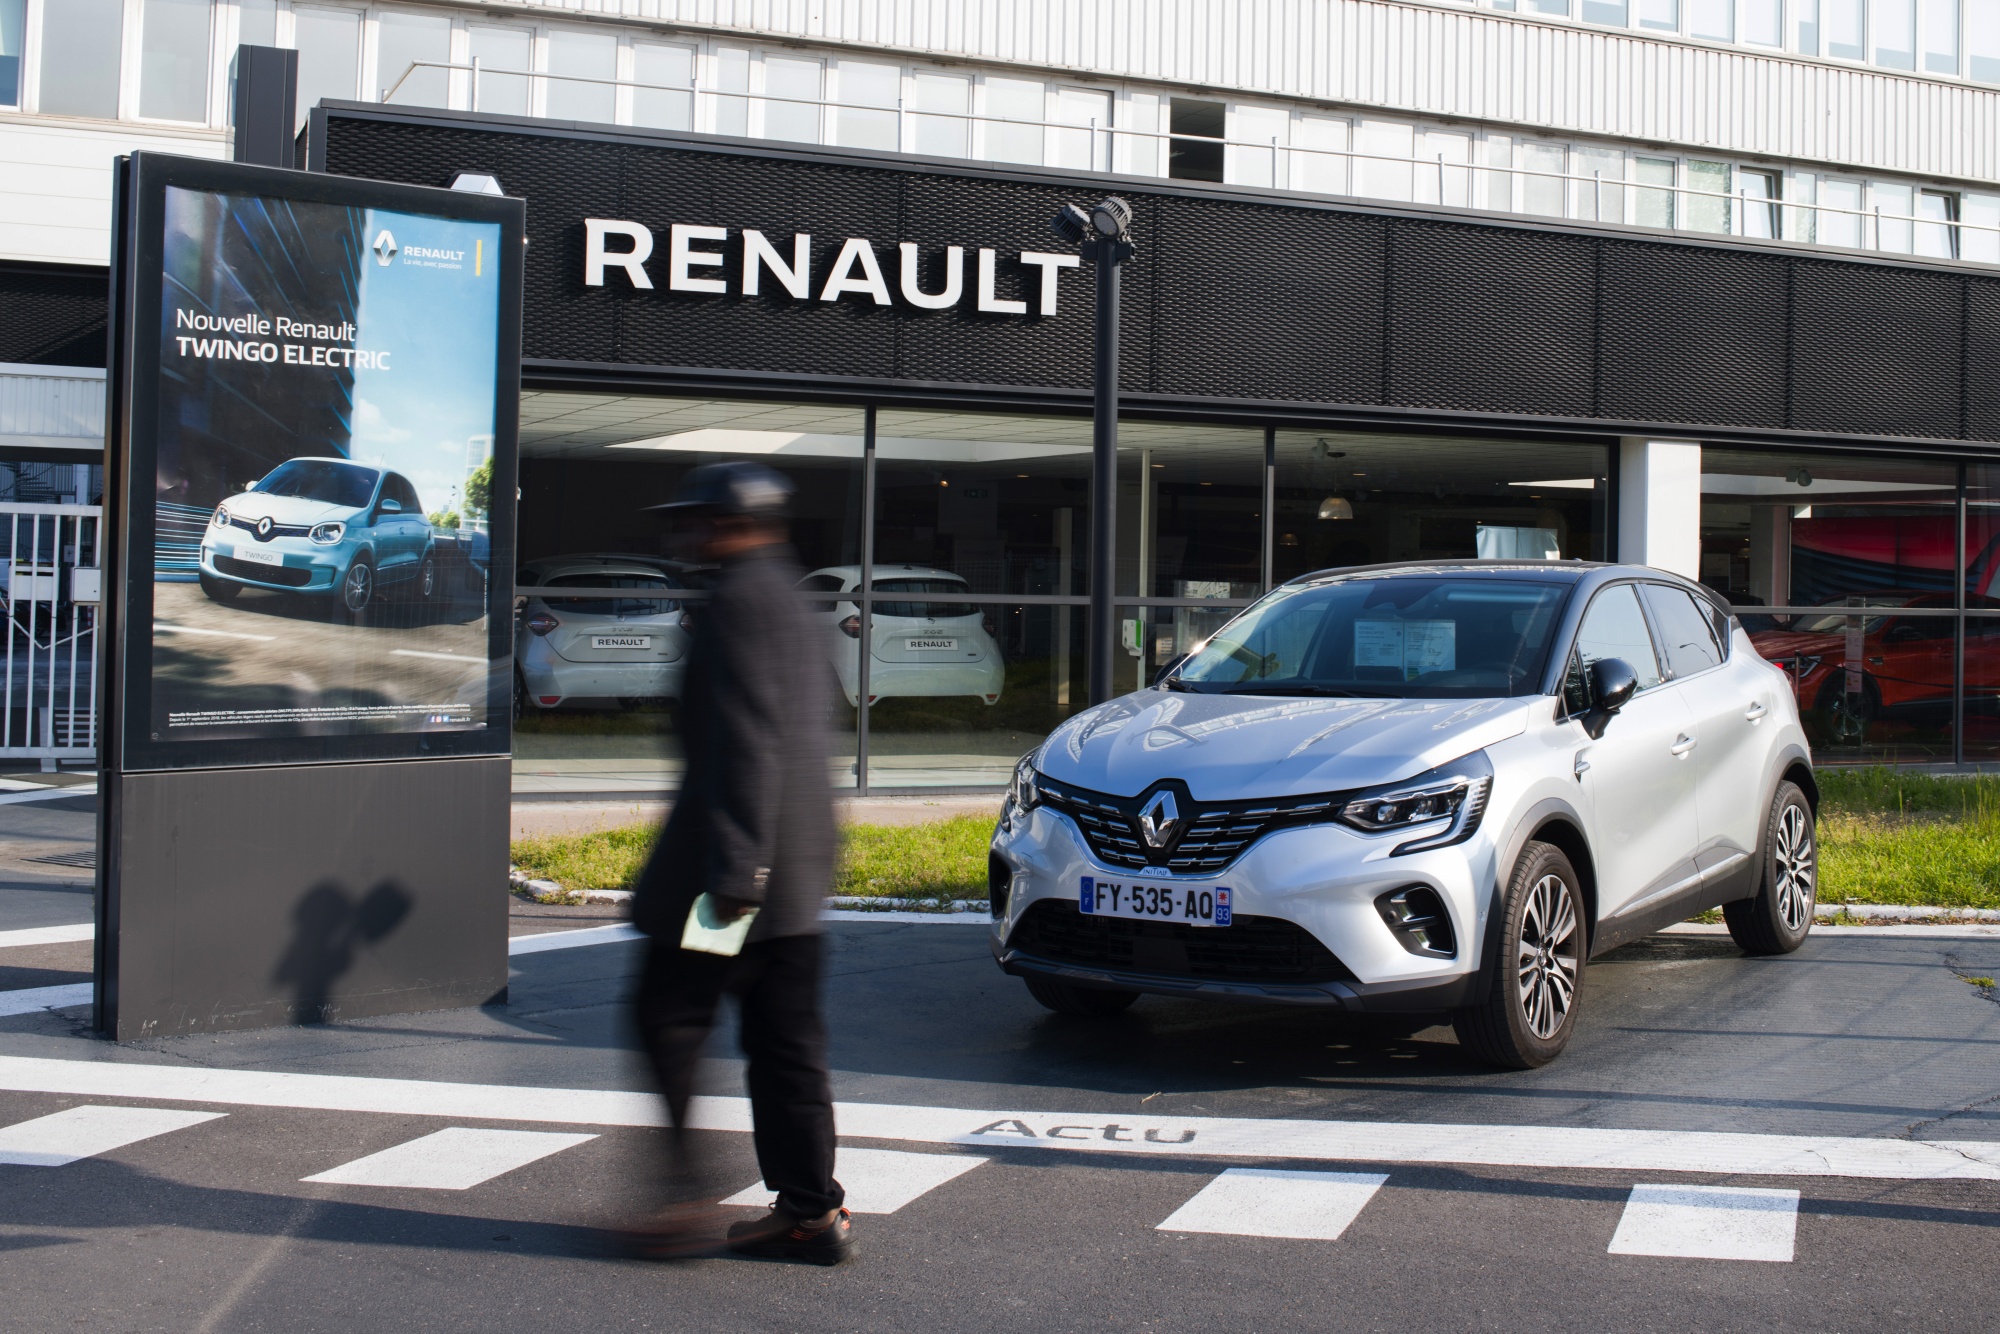 Renault New Car Reviews, News, Models & Prices - Drive